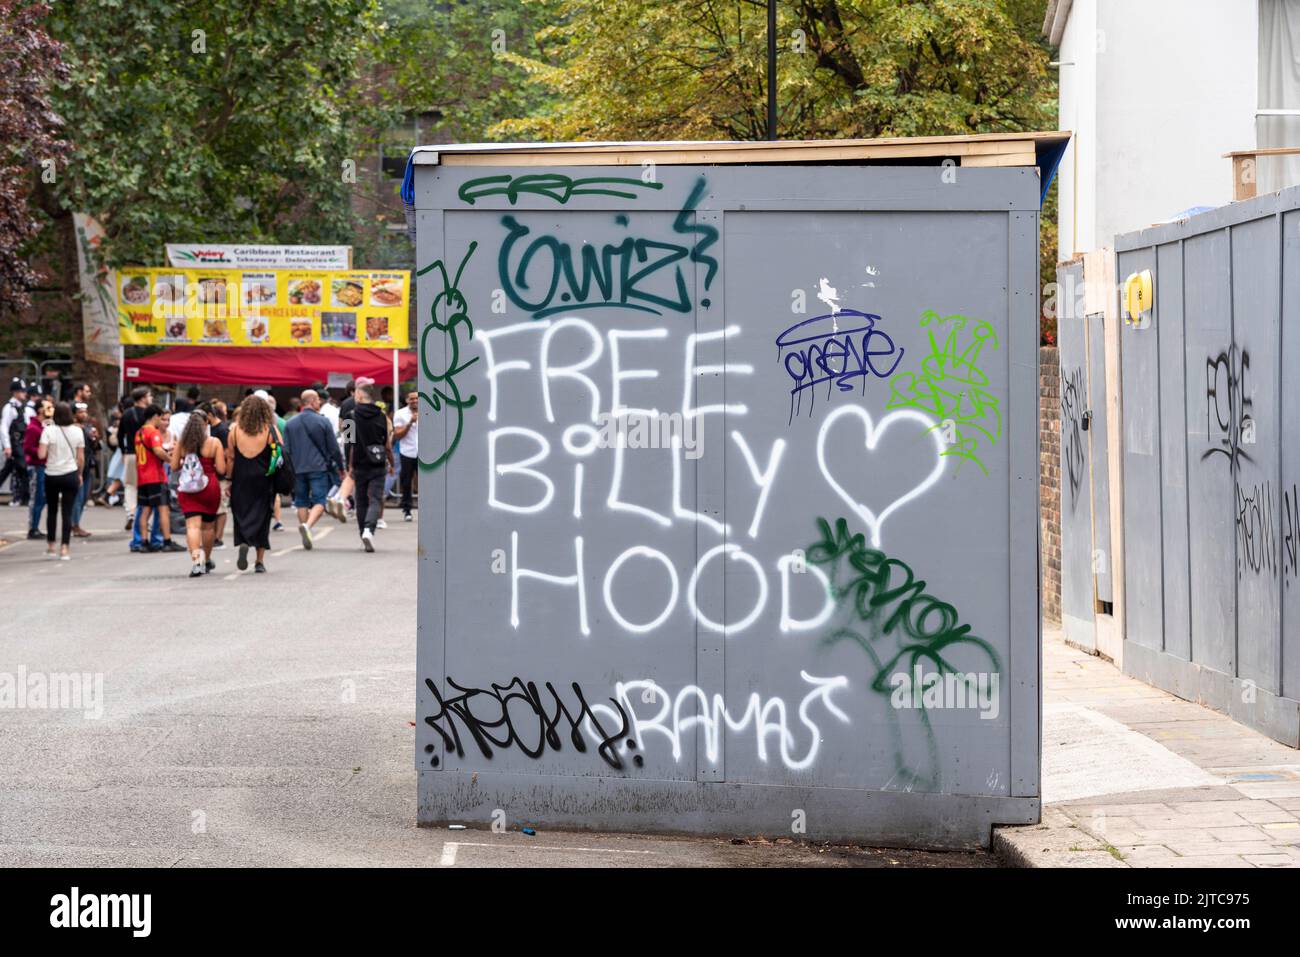 Temporary toilets at Notting Hill Carnival with free Billy Hood graffiti. Billy Hood is 24-year-old pro footballer sentenced to 25 years in Dubai. Stock Photo